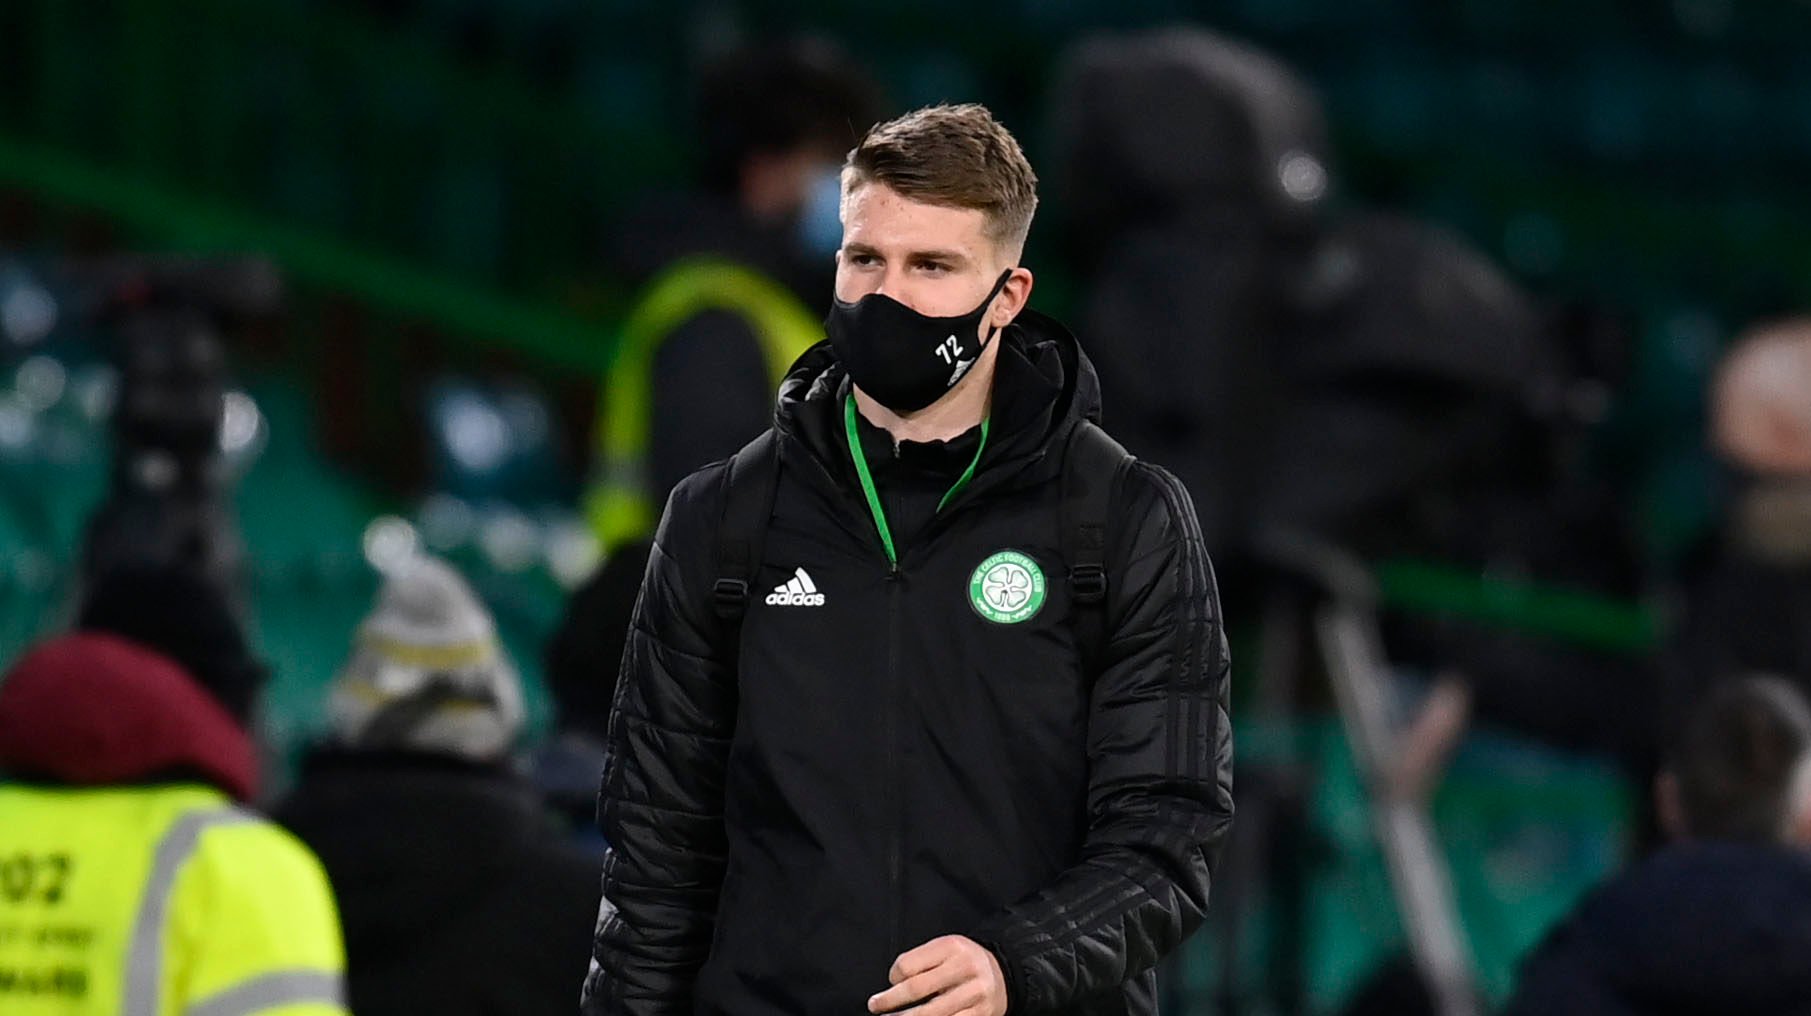 Celtic could be forced into playing untested defenders for crucial matches